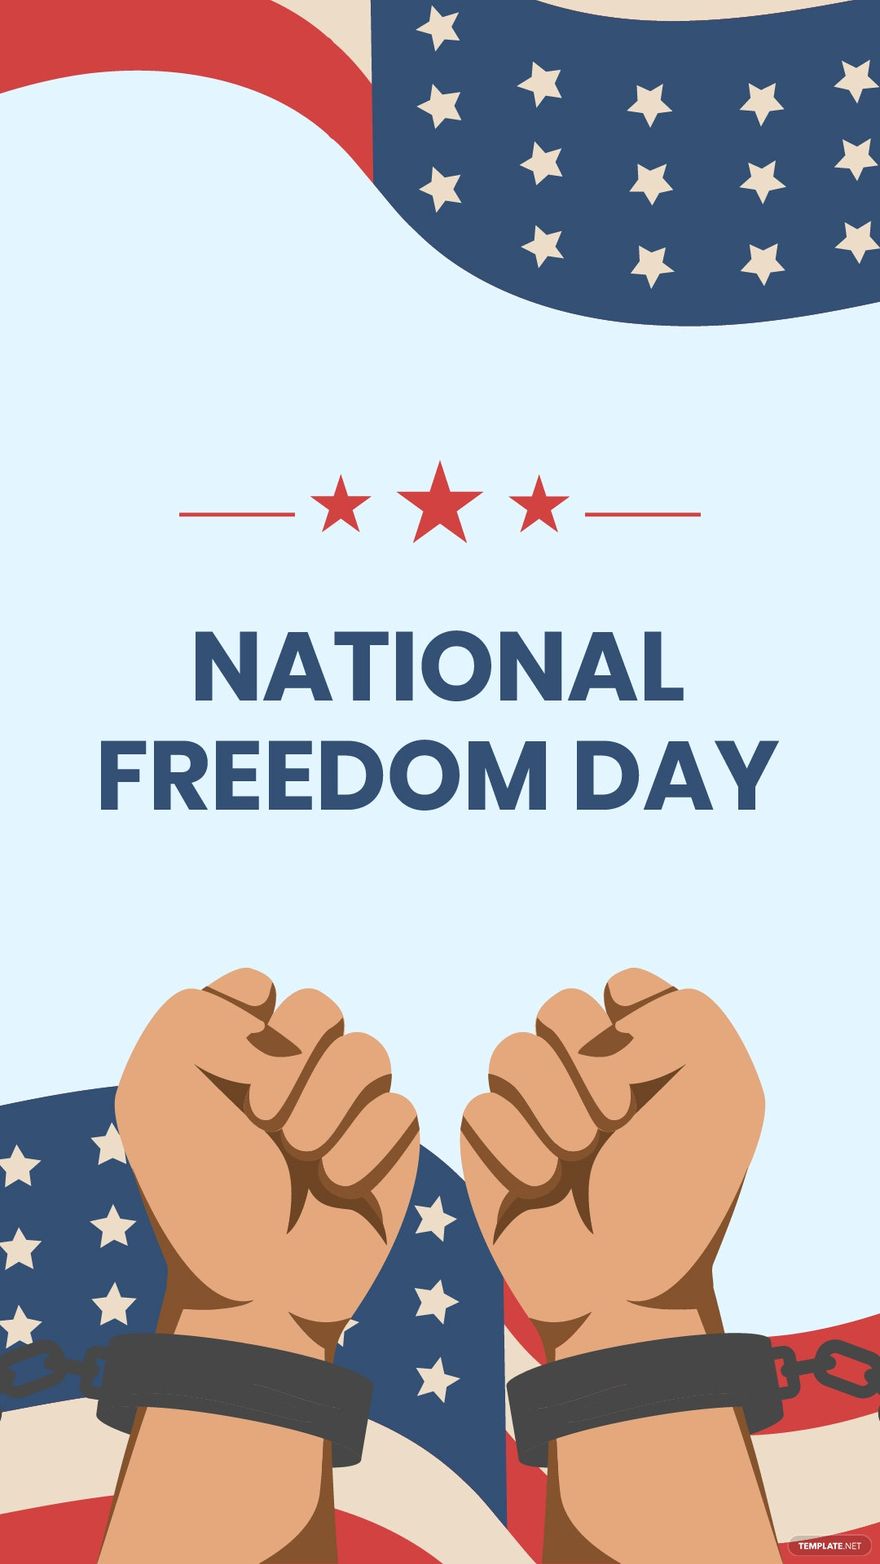 Free National Freedom Day iPhone Background in PDF, Illustrator, PSD, EPS, SVG, JPG, PNG